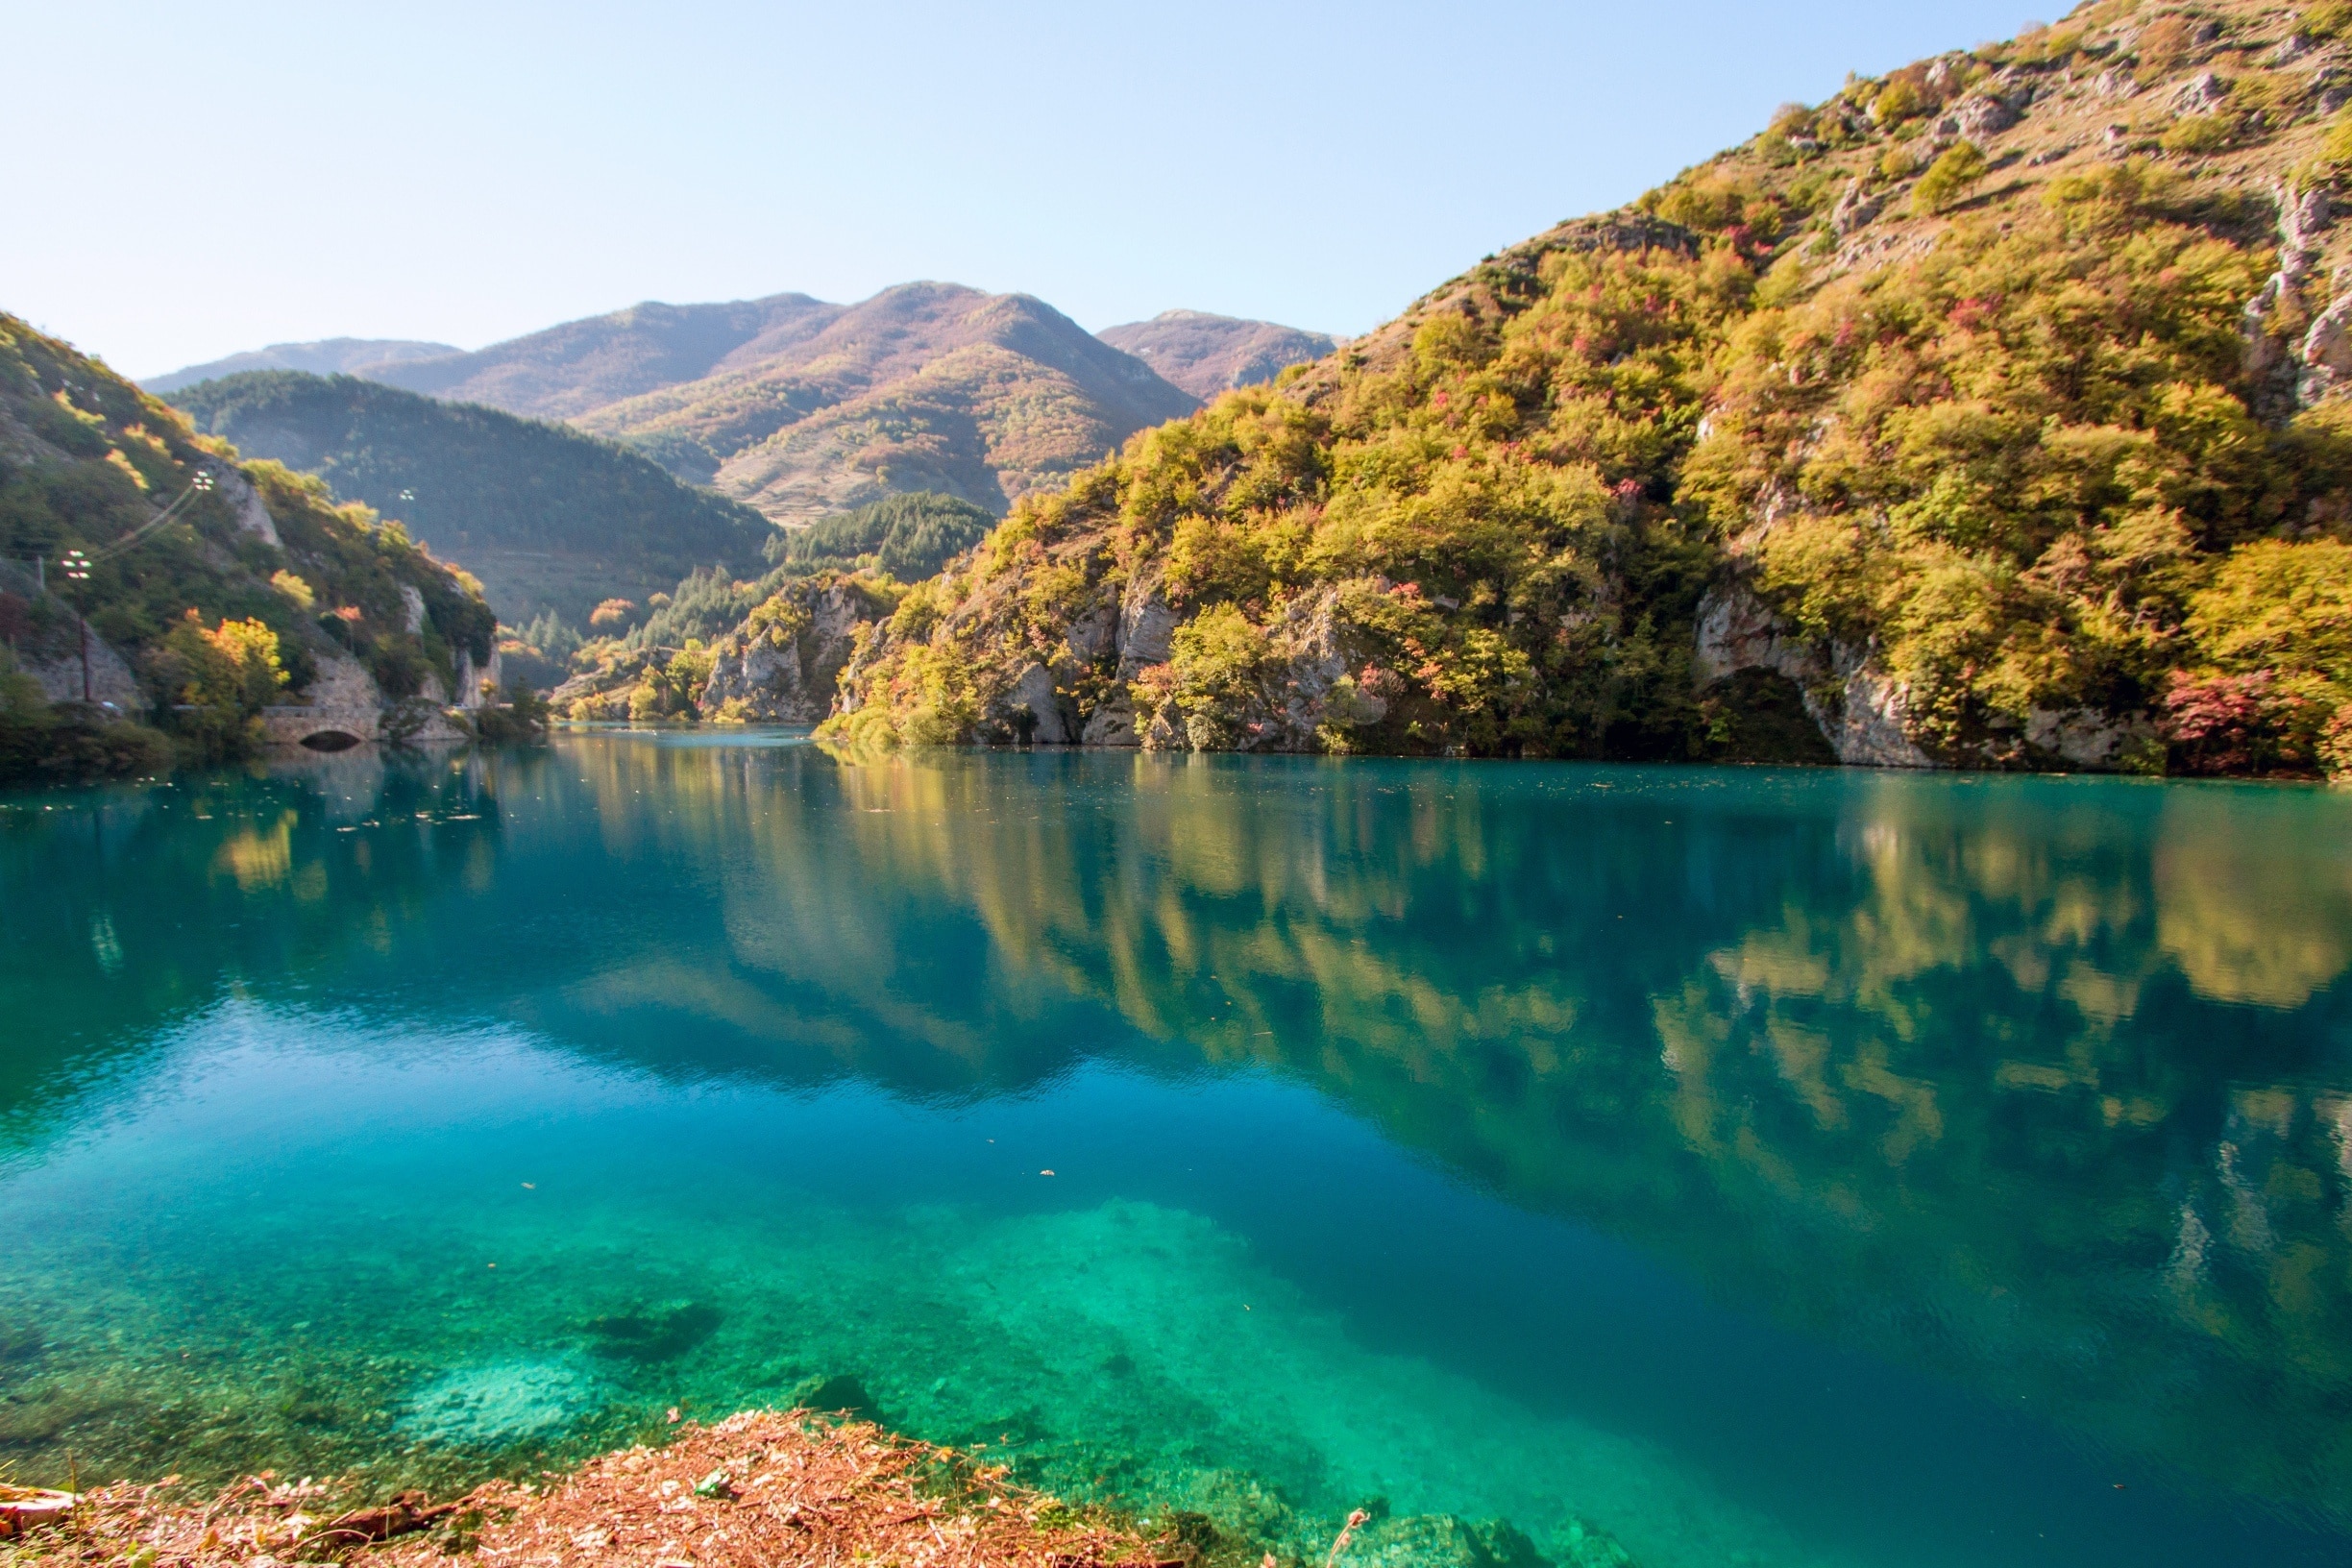 Scanno lake is the largest natural lake of Abruzzo, a region situated in central Italy.

The landscape is amazing and the color of the water is stunning.

#NationalPark #blue